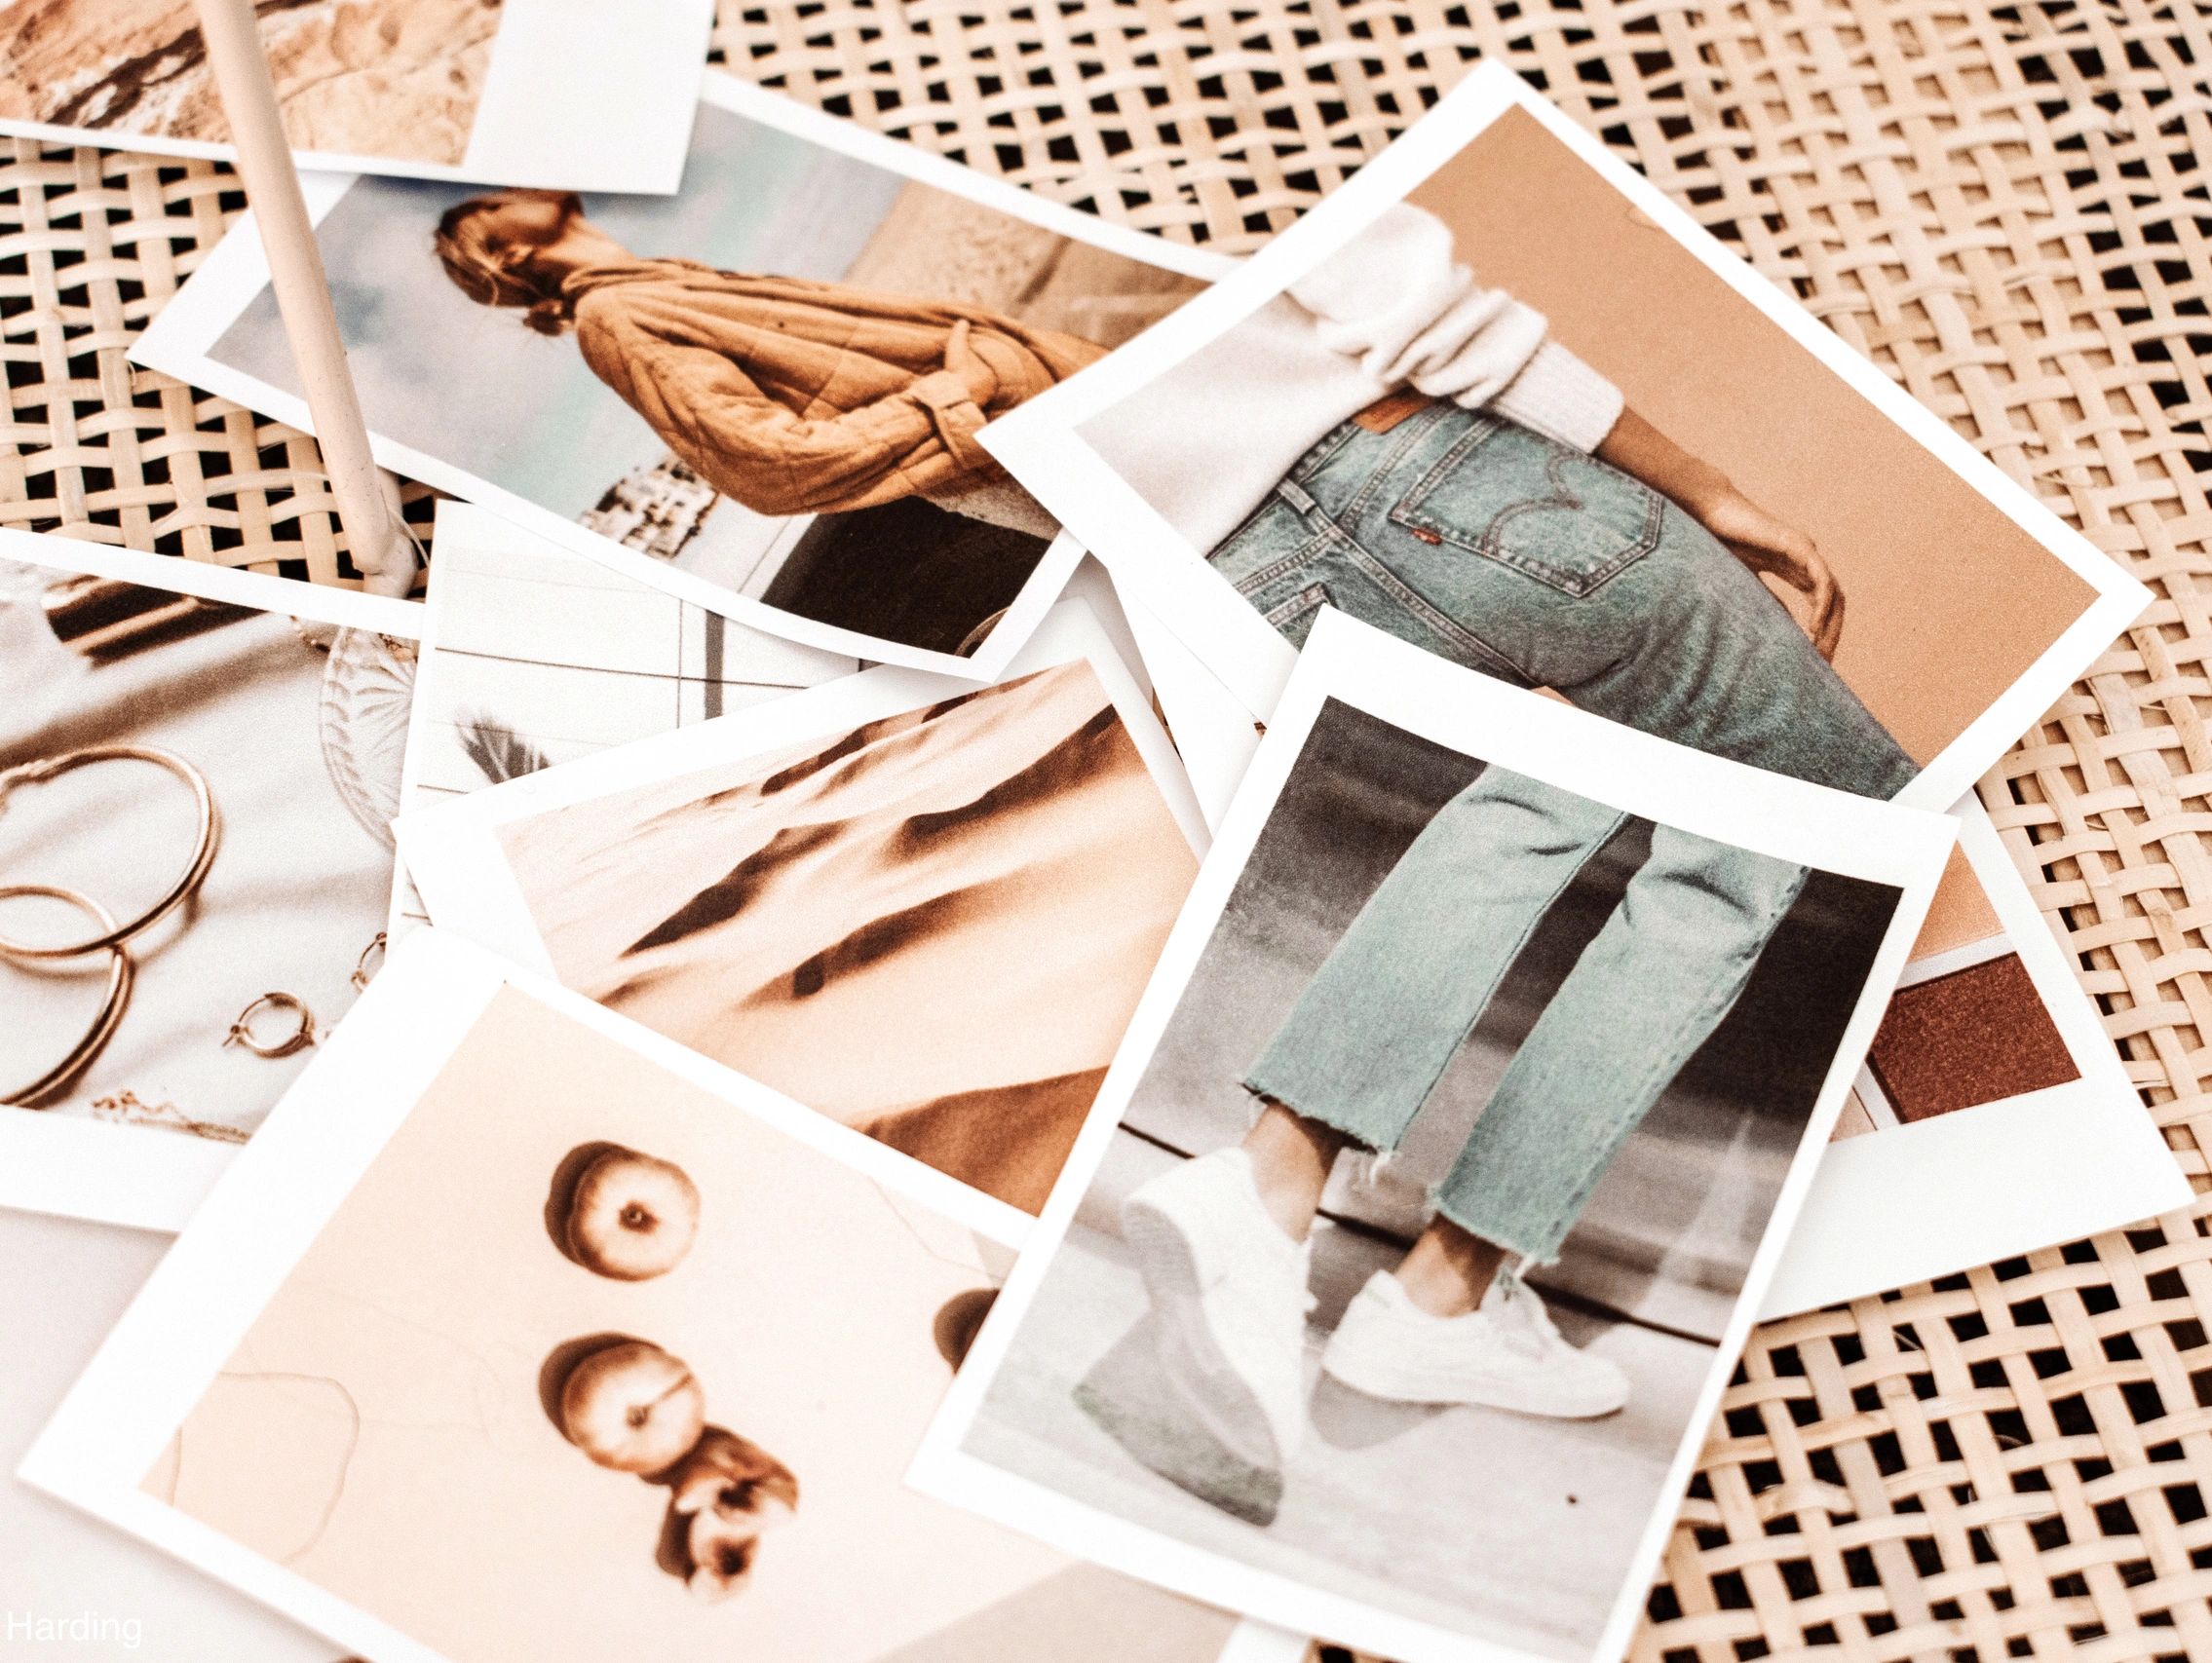 An assortment of photos scattered across a beige table